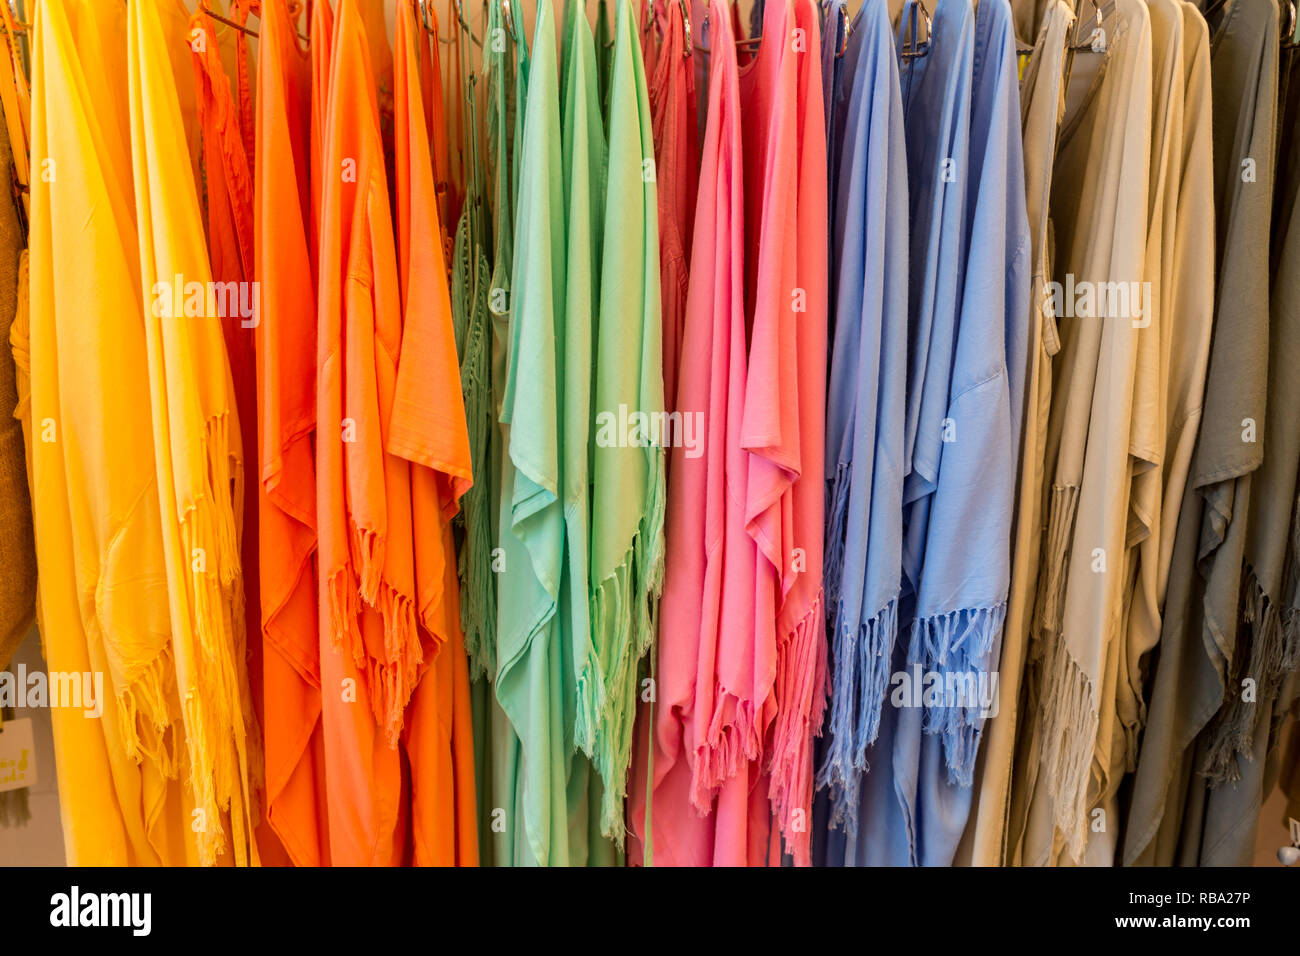 https://c8.alamy.com/comp/RBA27P/fashion-clothes-on-clothing-rack-bright-colorful-closet-close-up-of-rainbow-color-choice-of-trendy-female-wear-on-hangers-in-store-closet-or-spring-cleaning-concept-summer-home-wardrobe-RBA27P.jpg